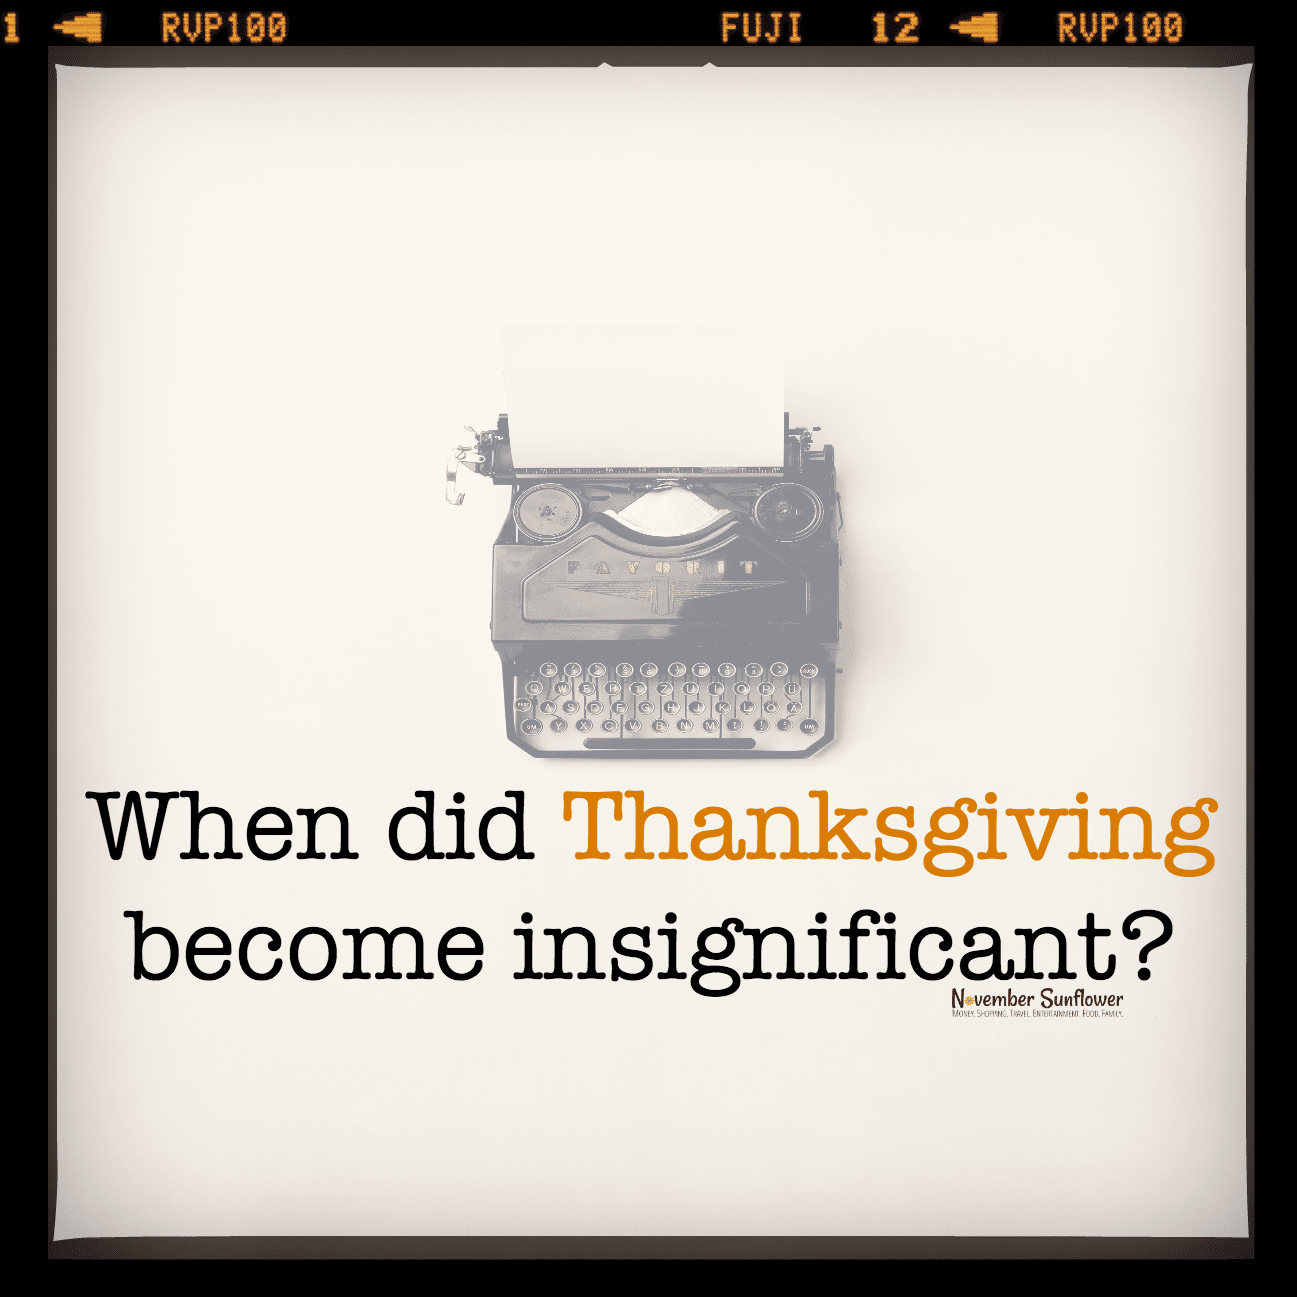 When did Thanksgiving become insignificant?